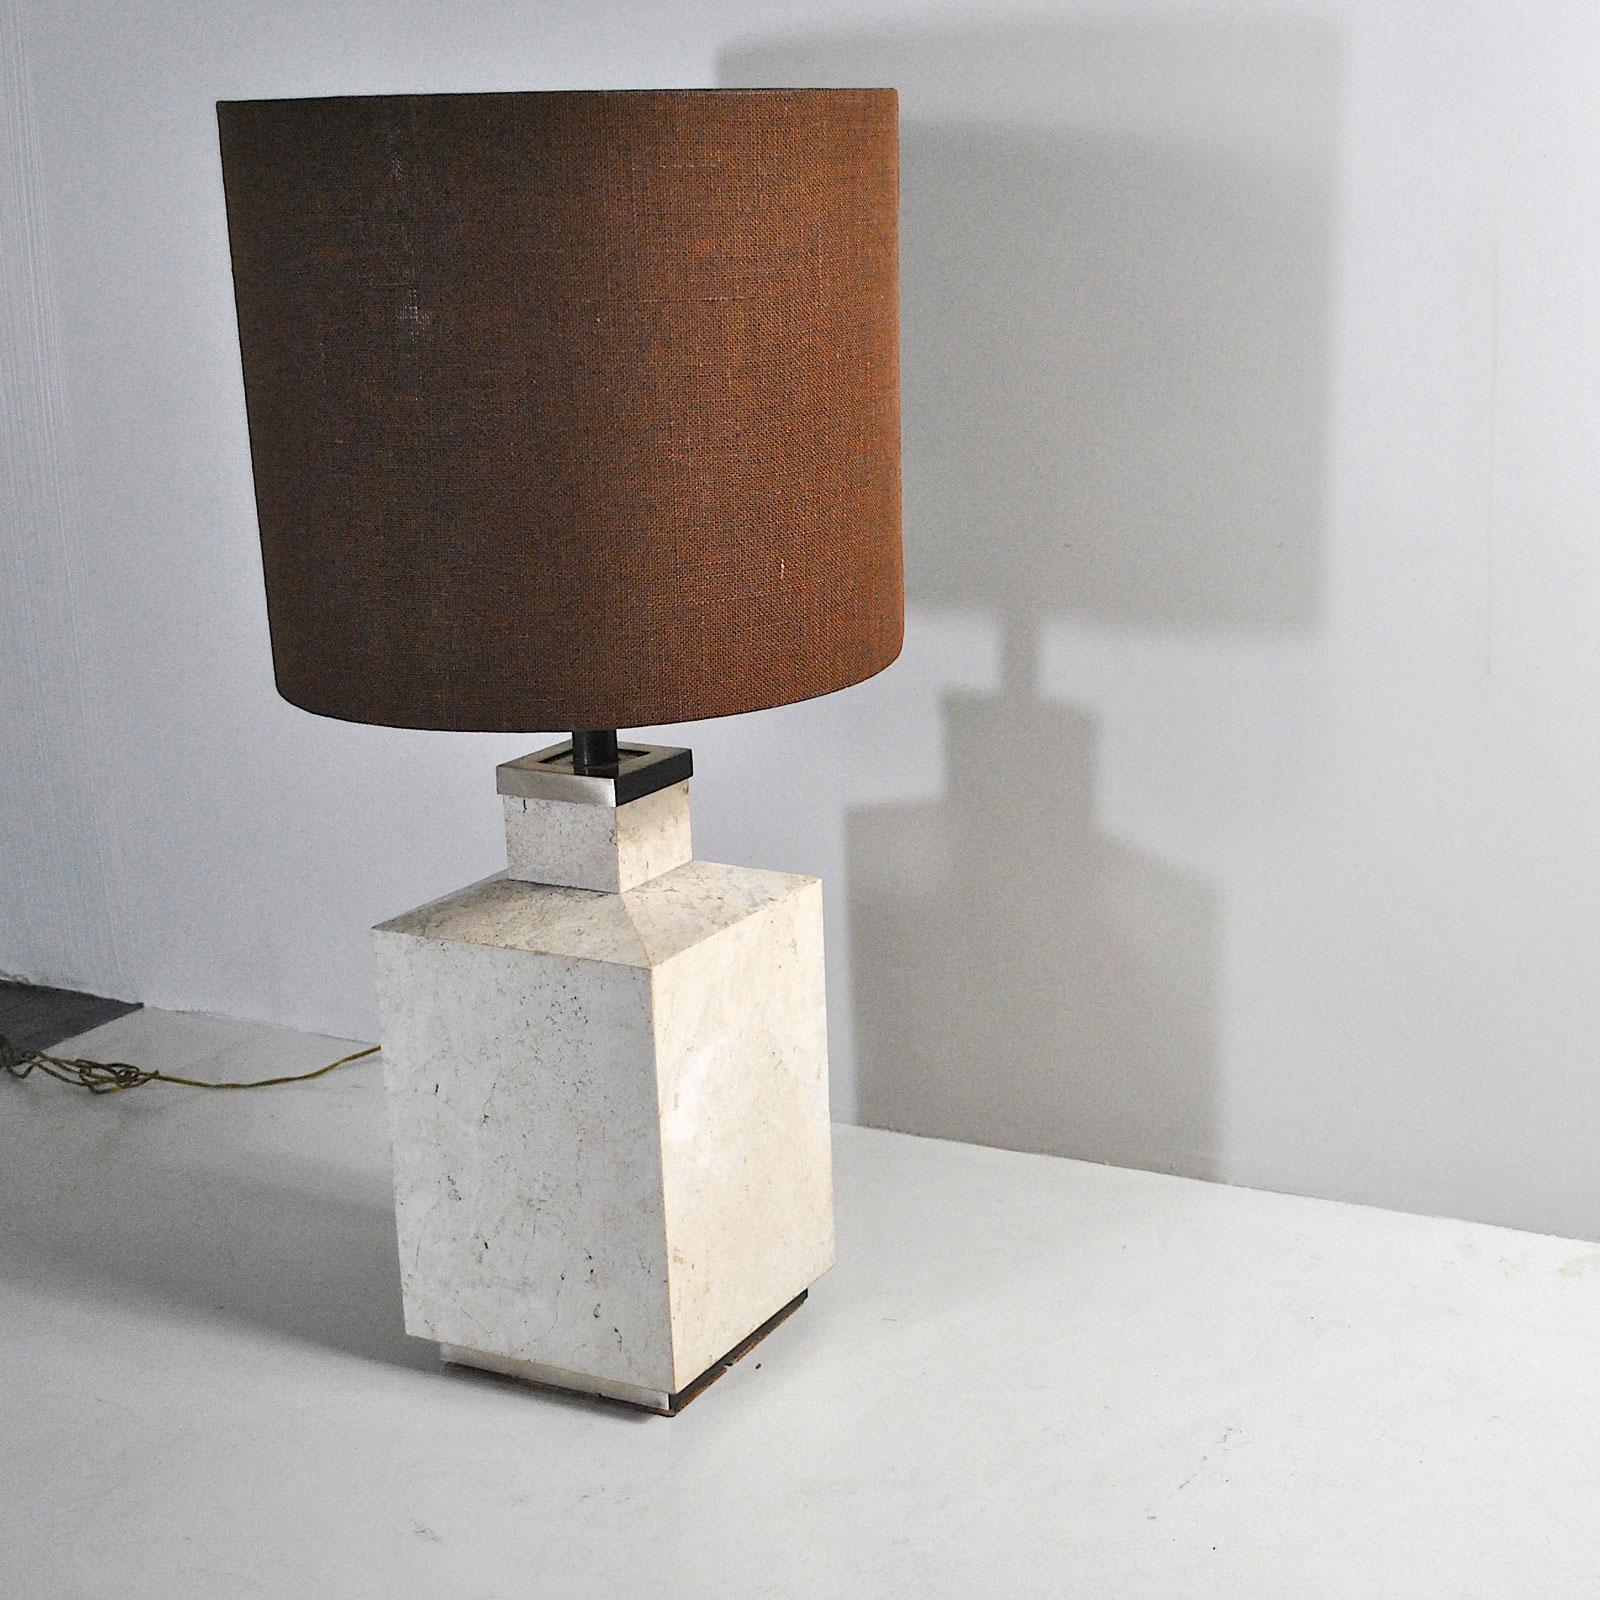 Late 20th Century Italian Midcentury Table Lamp Form the 1970s